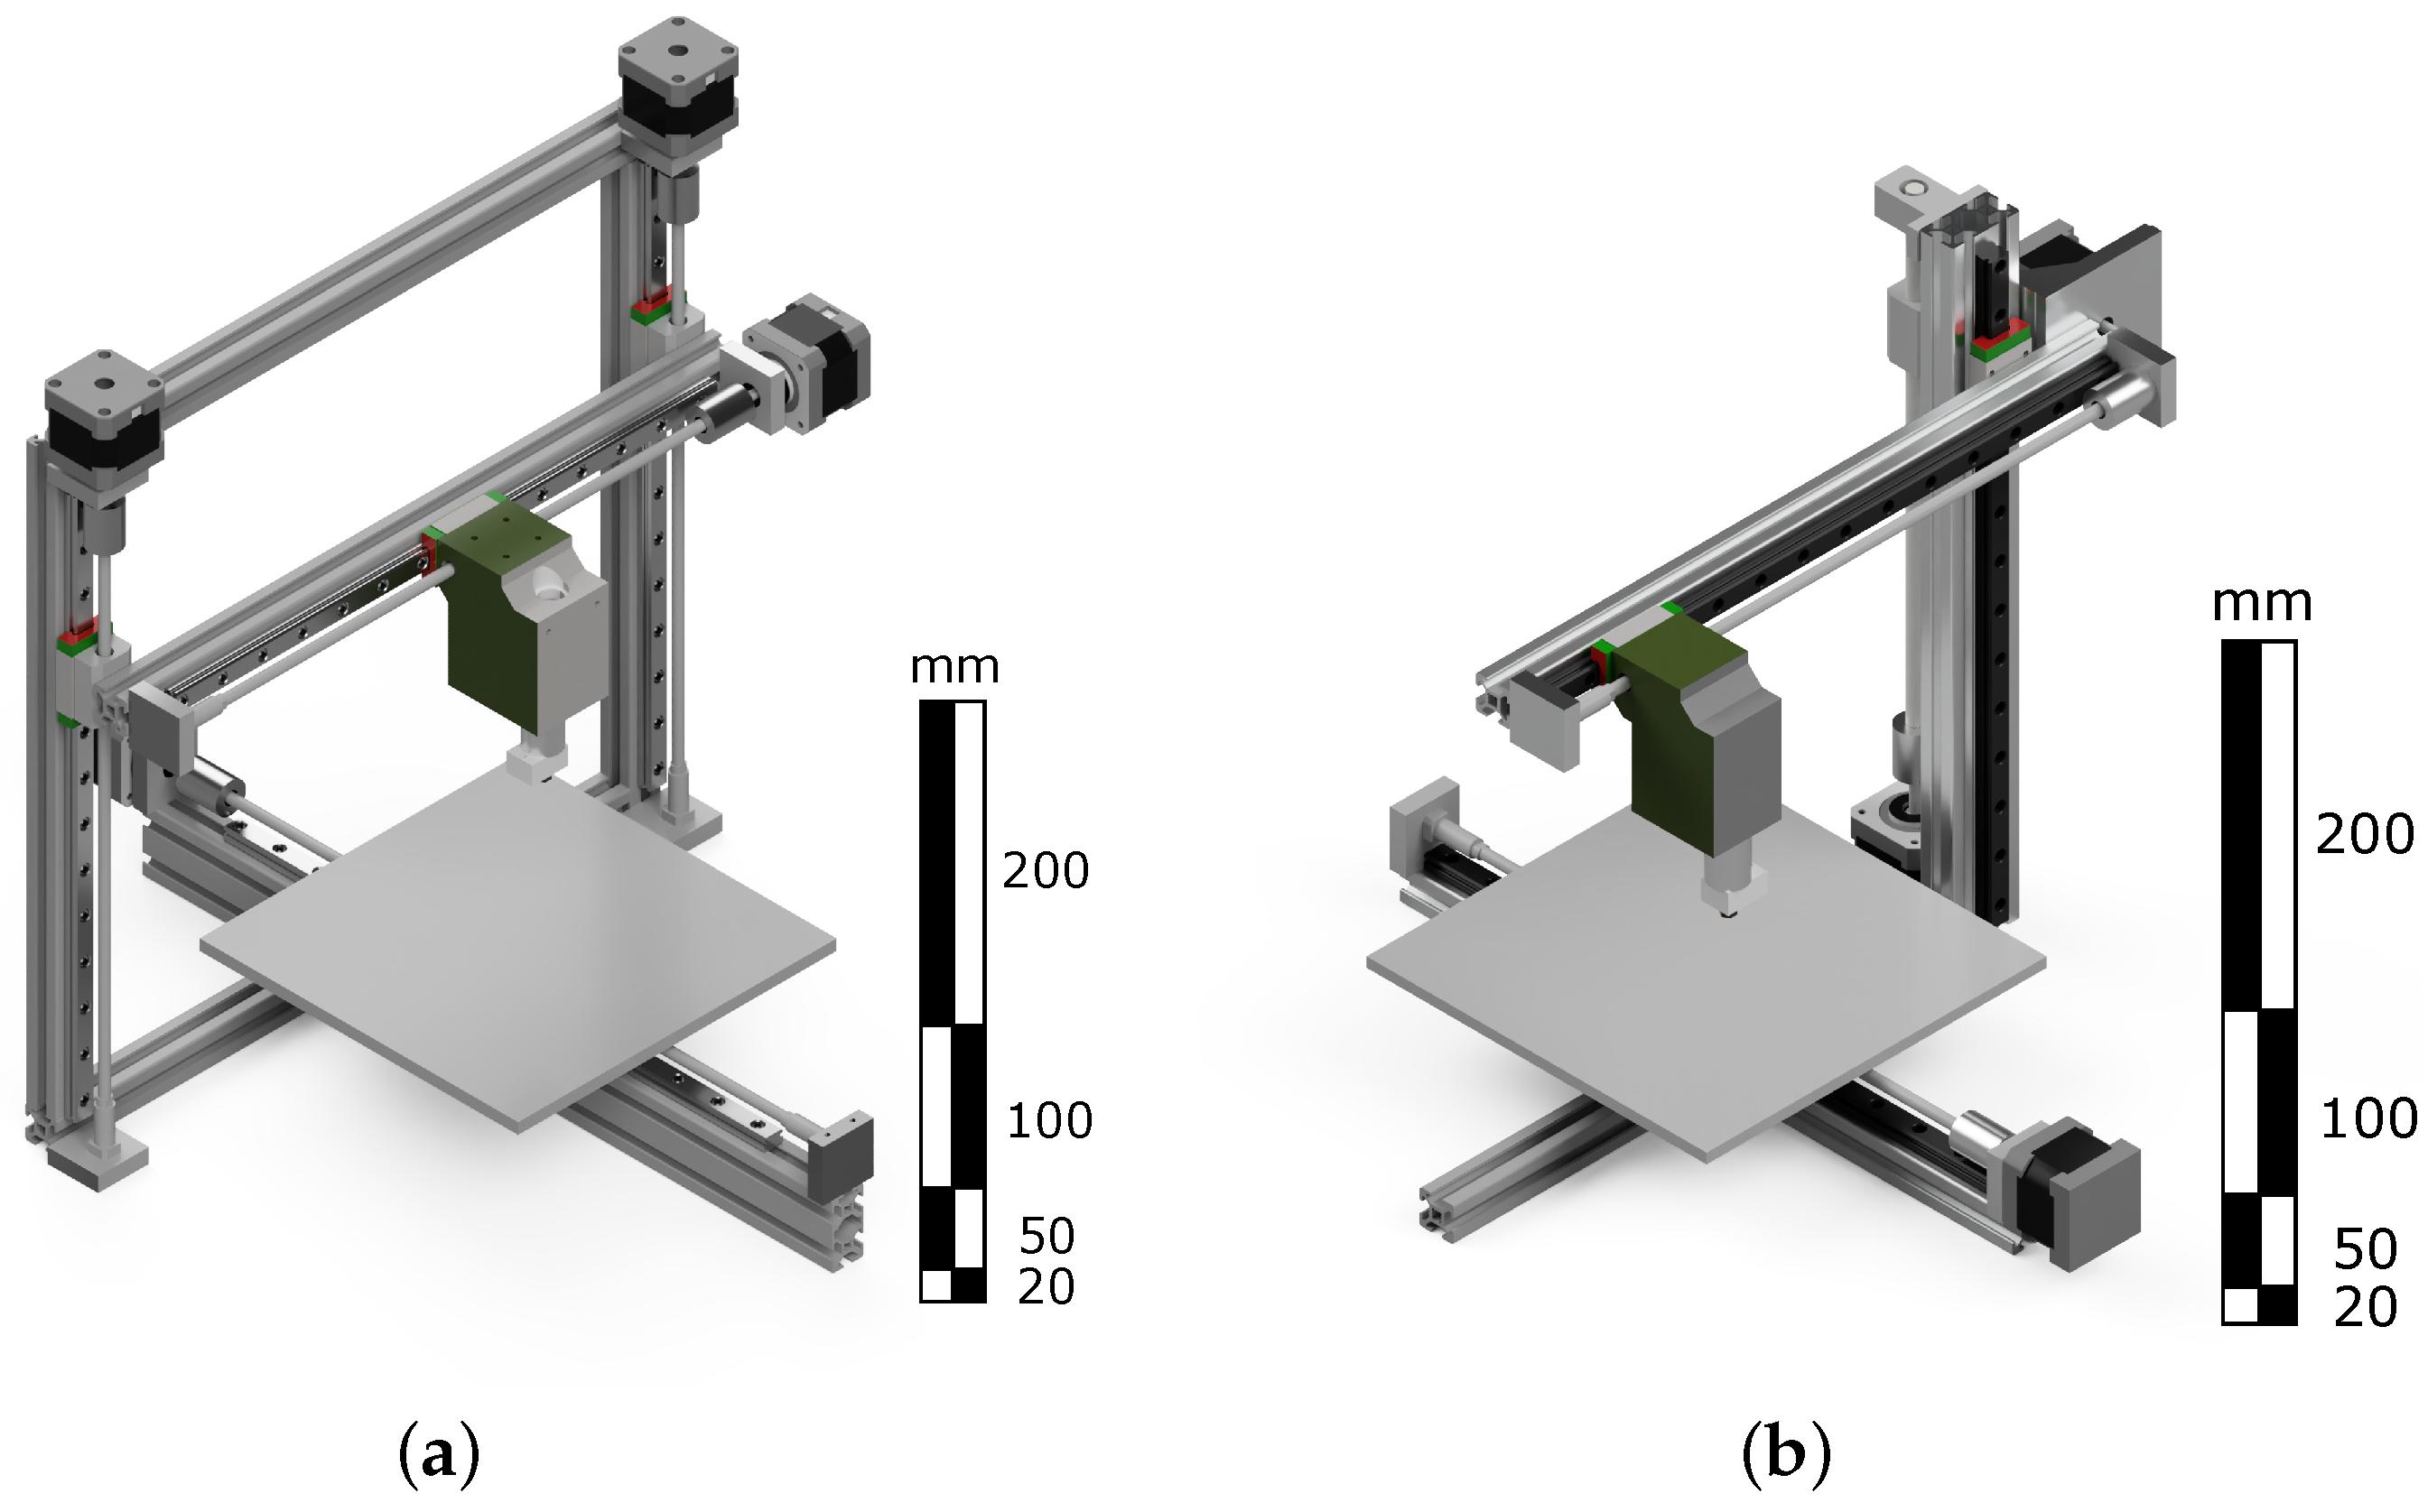 Applied Sciences | Free Full-Text | Estimating Natural Frequencies of Cartesian 3D Printer Based on Kinematic